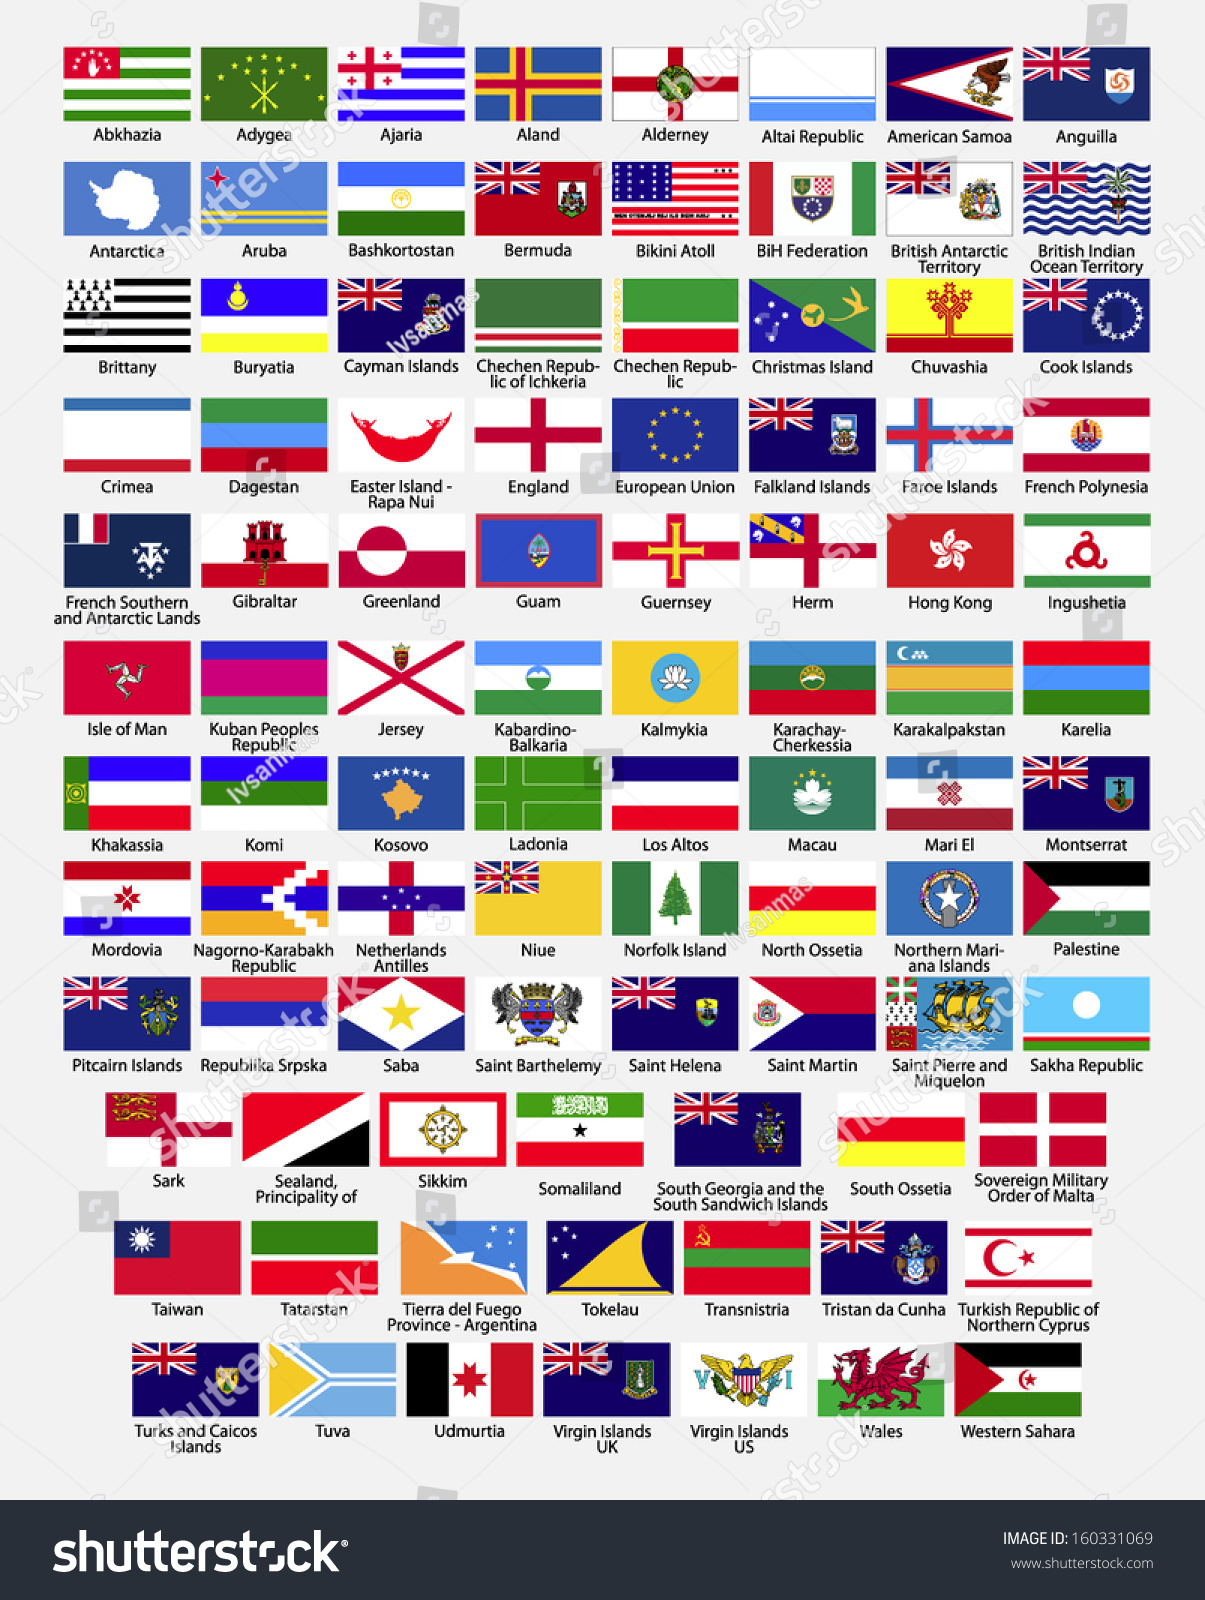 Island Flags Of The World